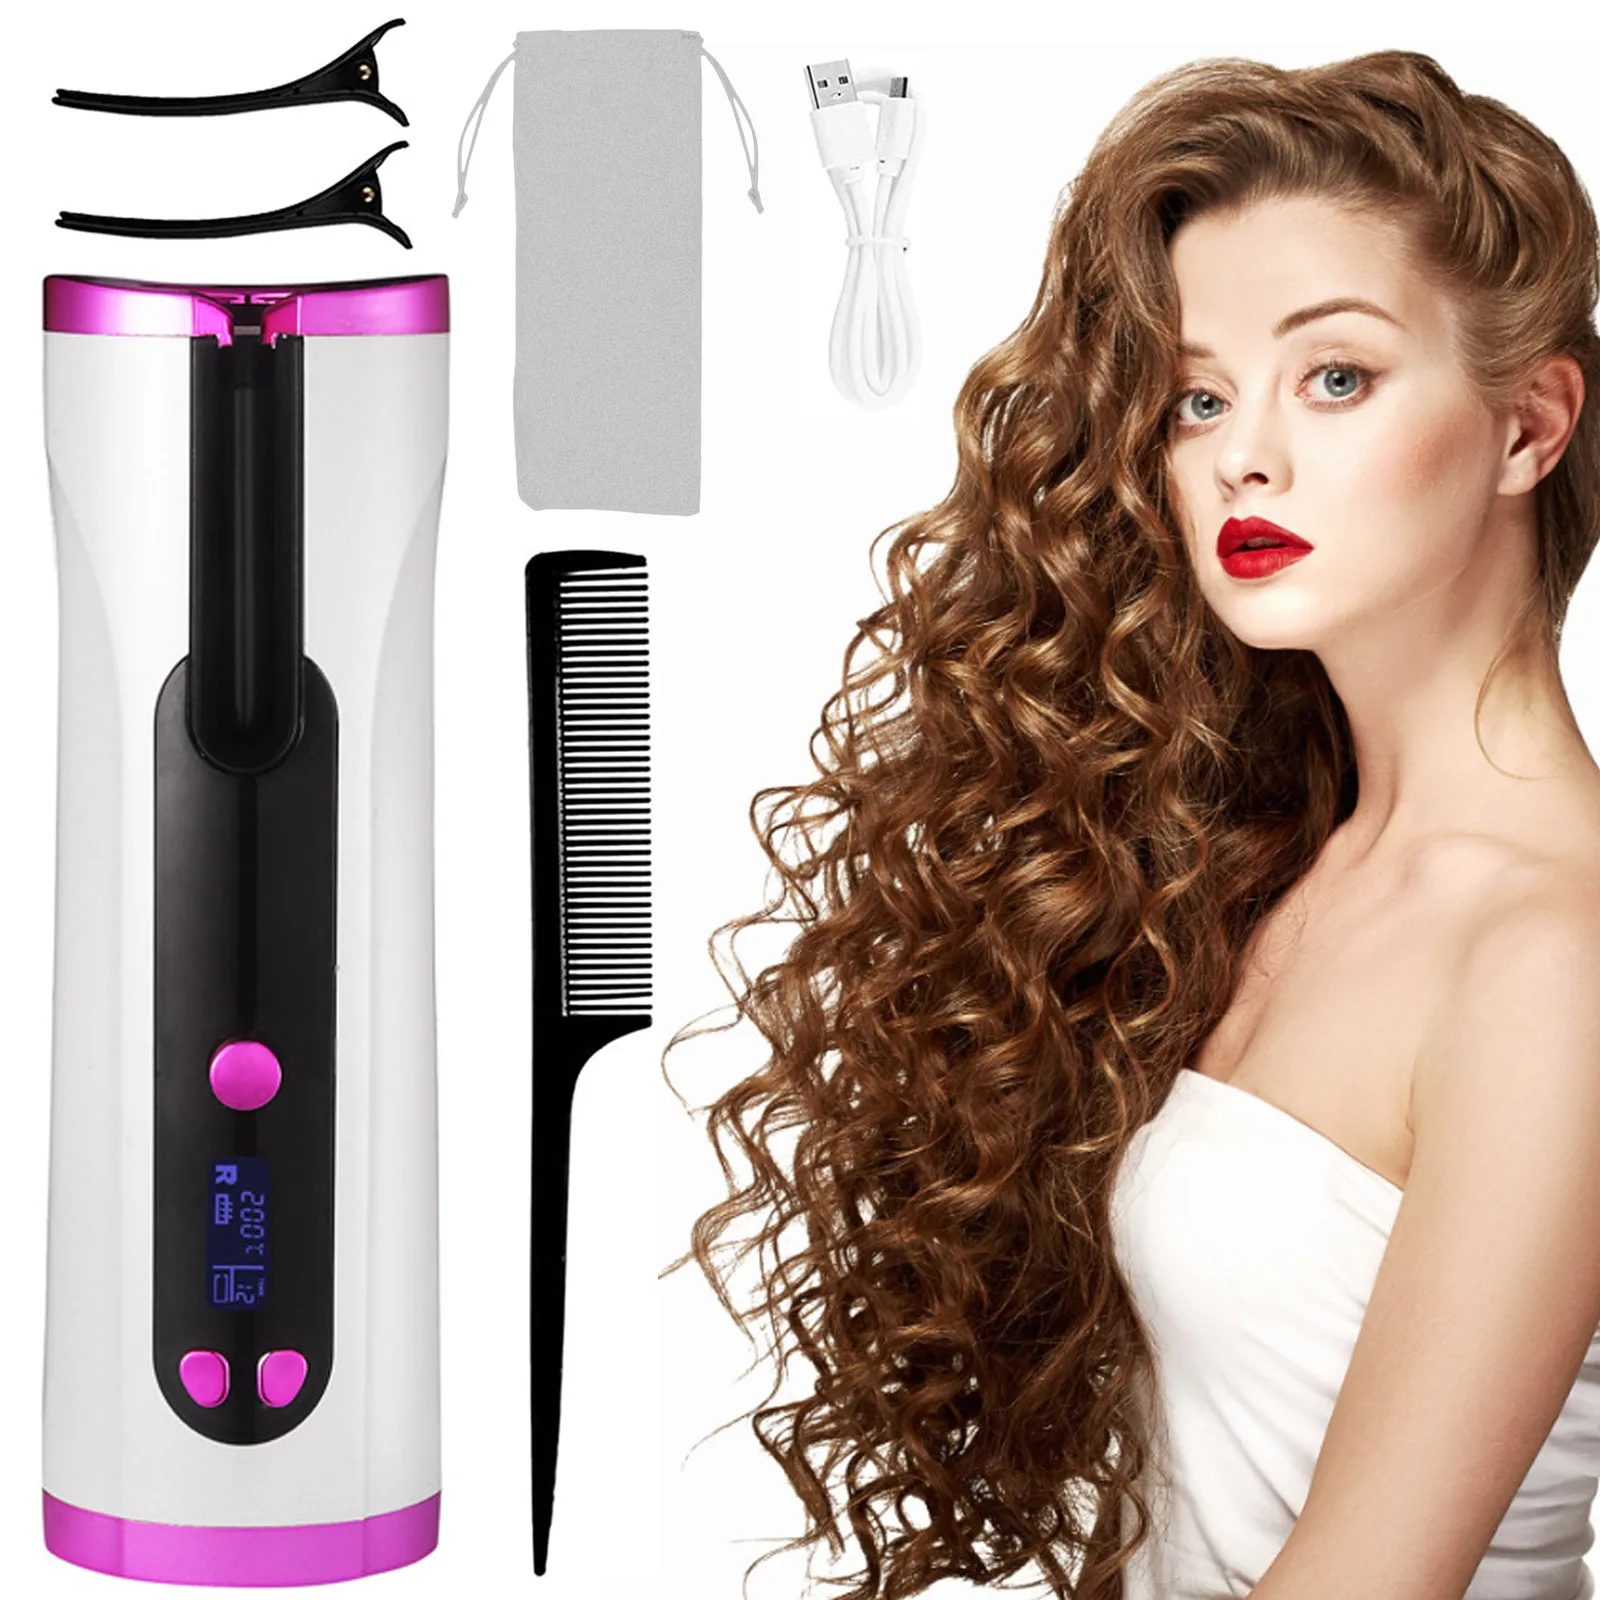 Portable Automatic Curling Iron Wireless Rechargeable Hair Curler Roller Quick Heating Smart Power Off for Wet Dry Hair trianglelab 115w high power chc pro kit pt1000 ceramic heating core quick heating for ender 3 volcano hotend cr10 mk3s blv